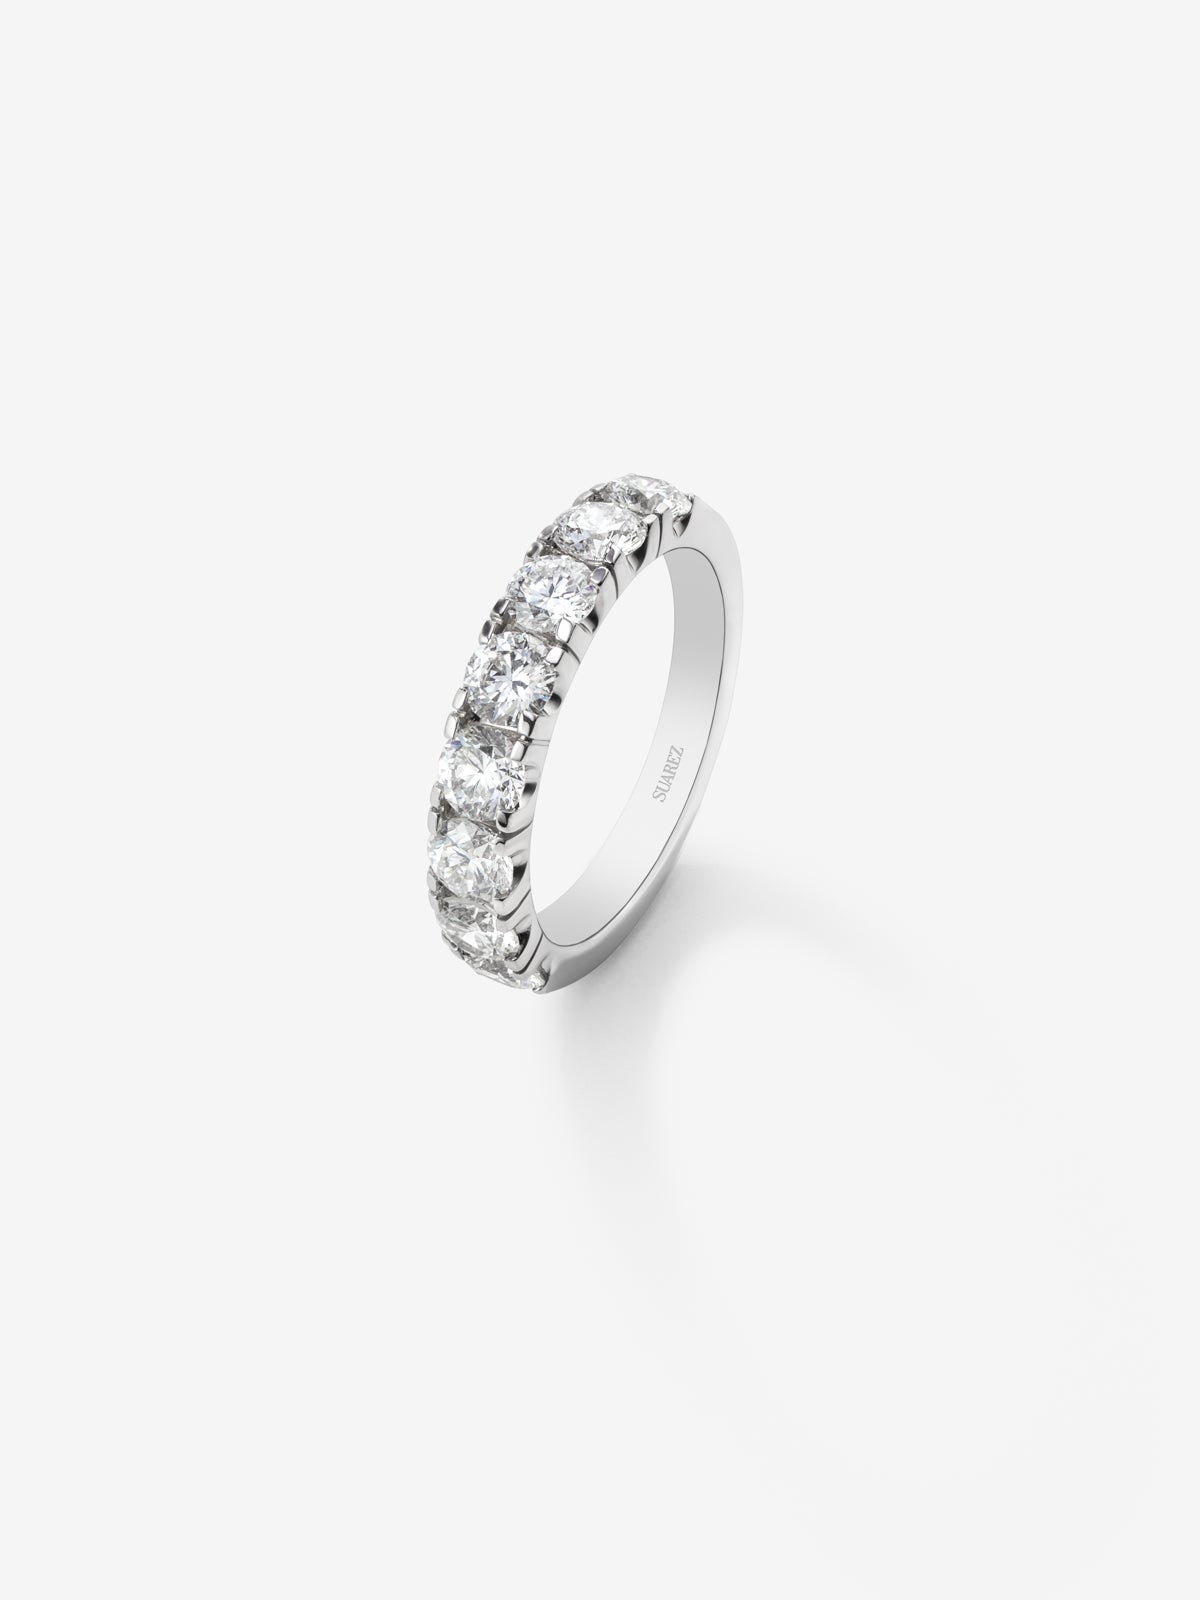 Half ring in 18K white gold with 11 brilliant-cut diamonds with a total of 0.55 cts